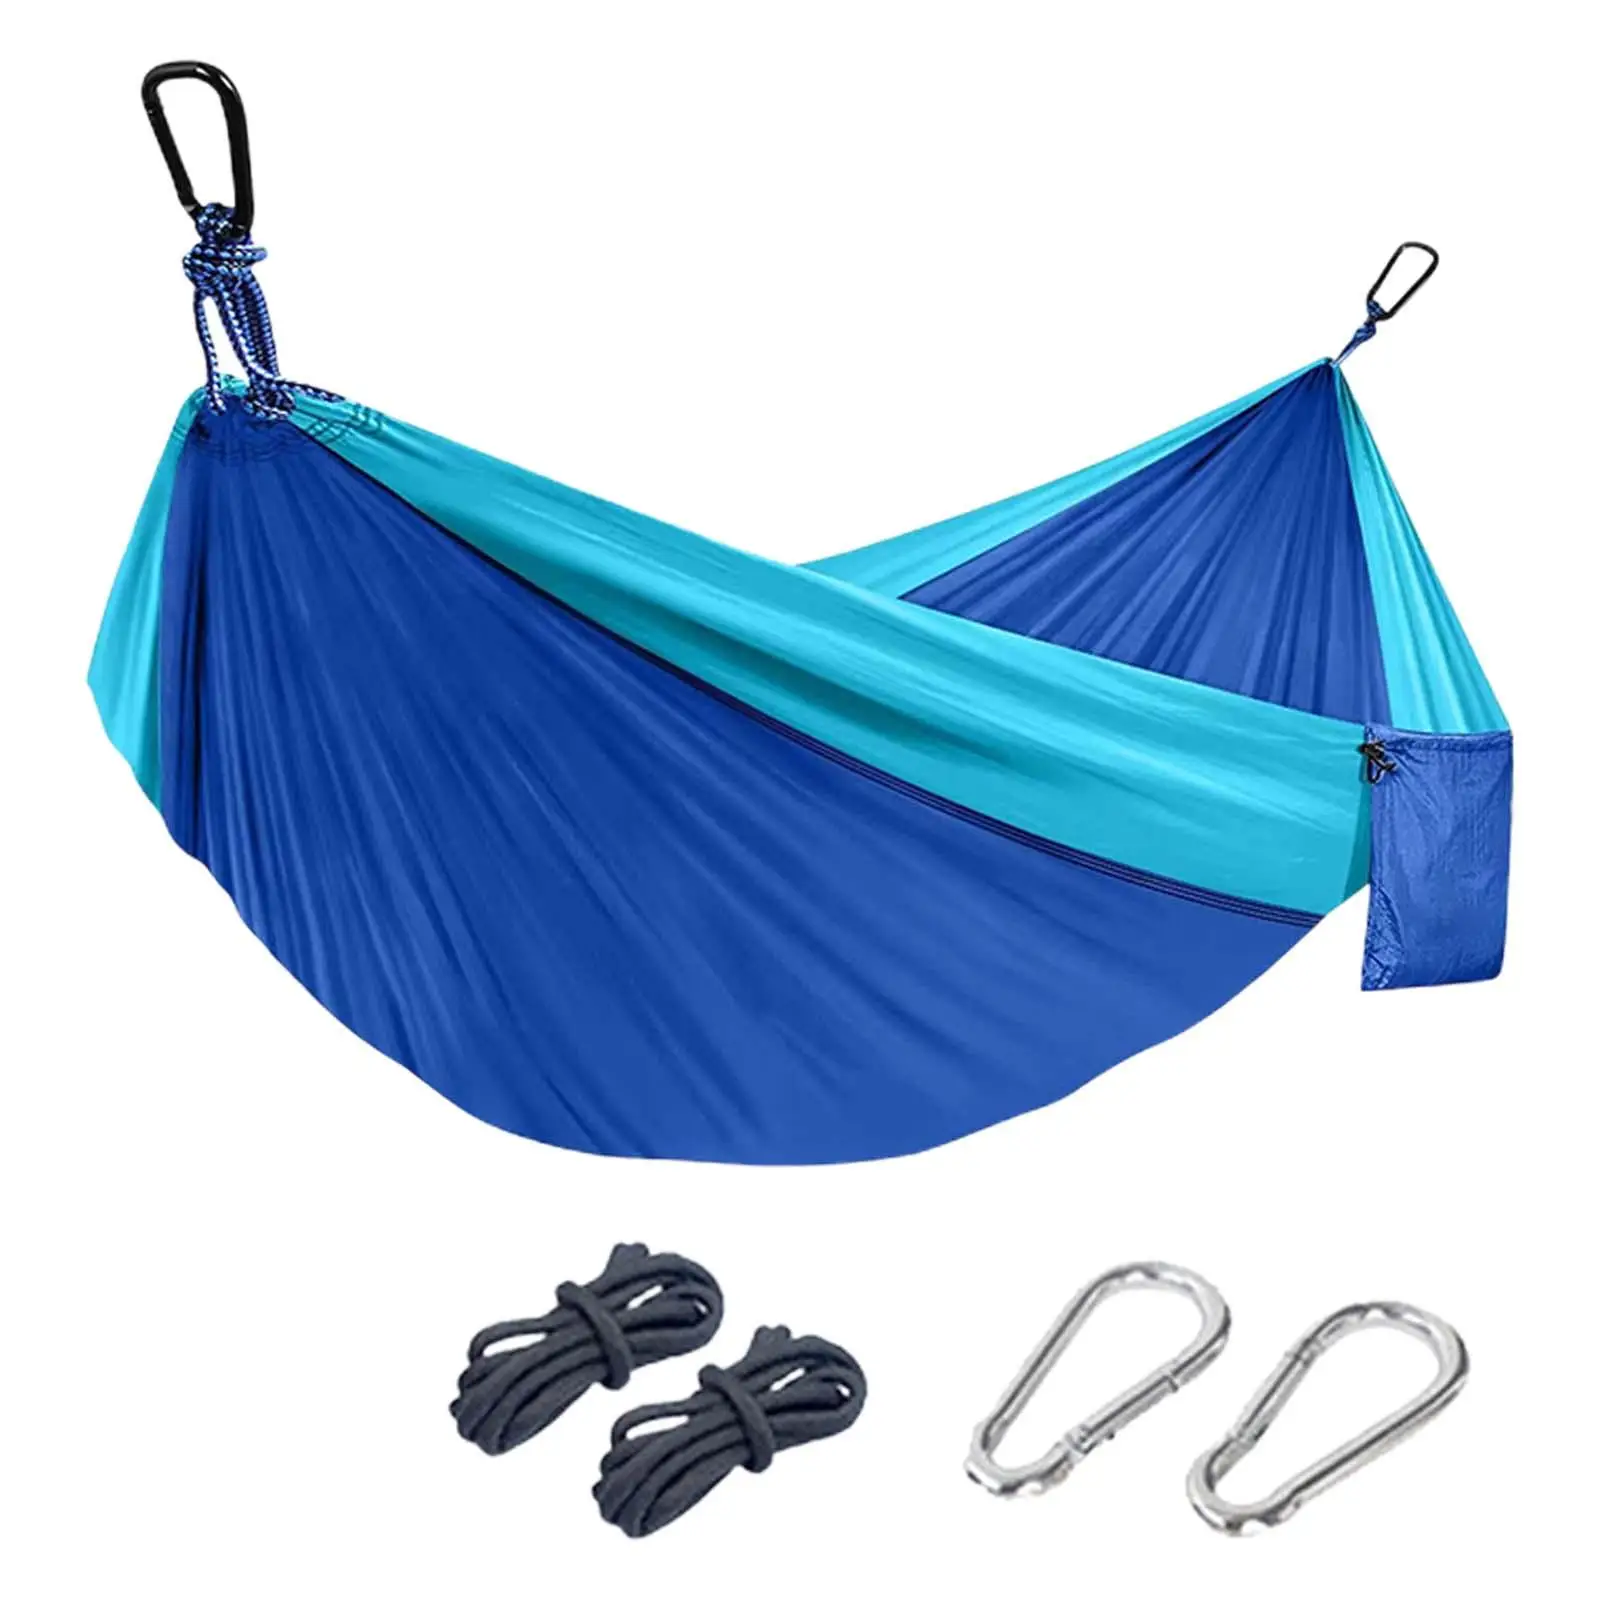 Outdoor Camping Travel Hammock Lightweight Portable Hammock Single or Double Hammock for Hiking Beach Backpacking Travel Outdoor